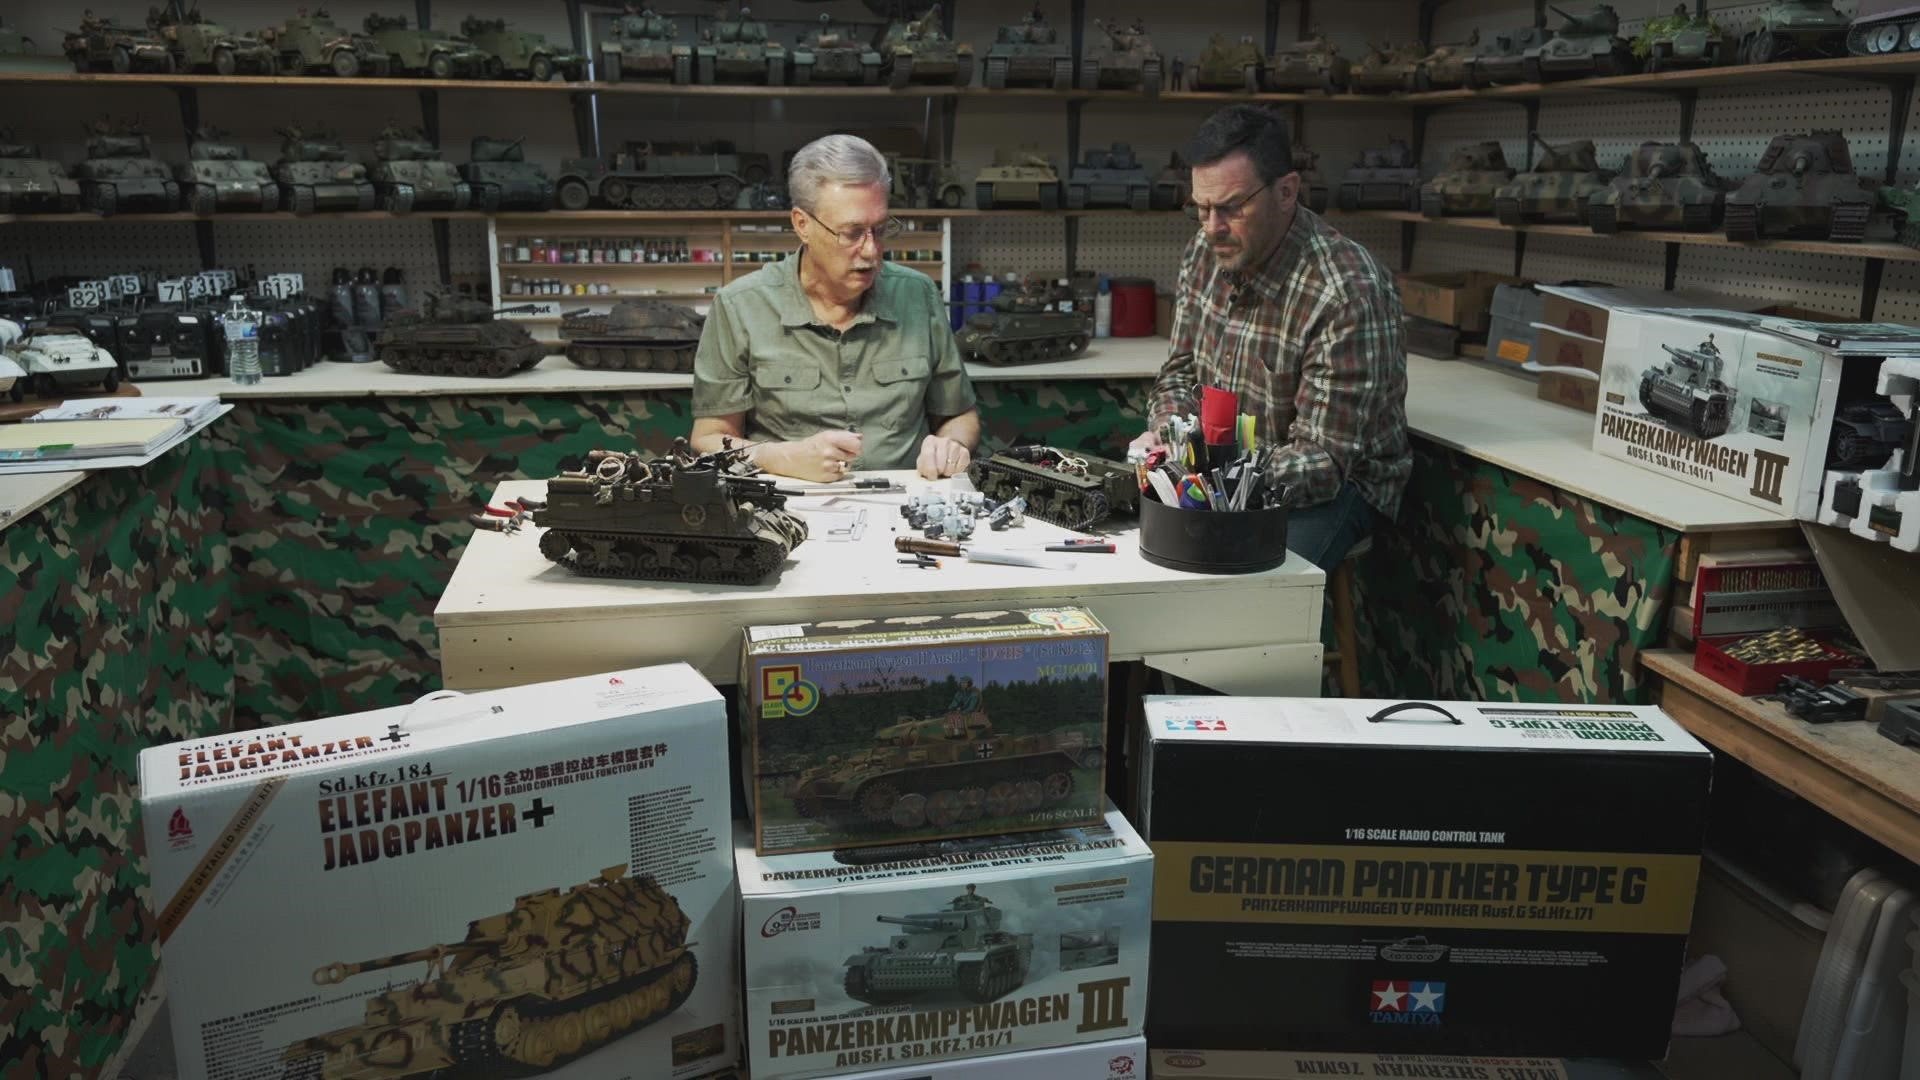 Since 1999, The Front Range Armored Group has put on 'battle days' with model tanks. They worry about their organization's future if they can't find a new home.